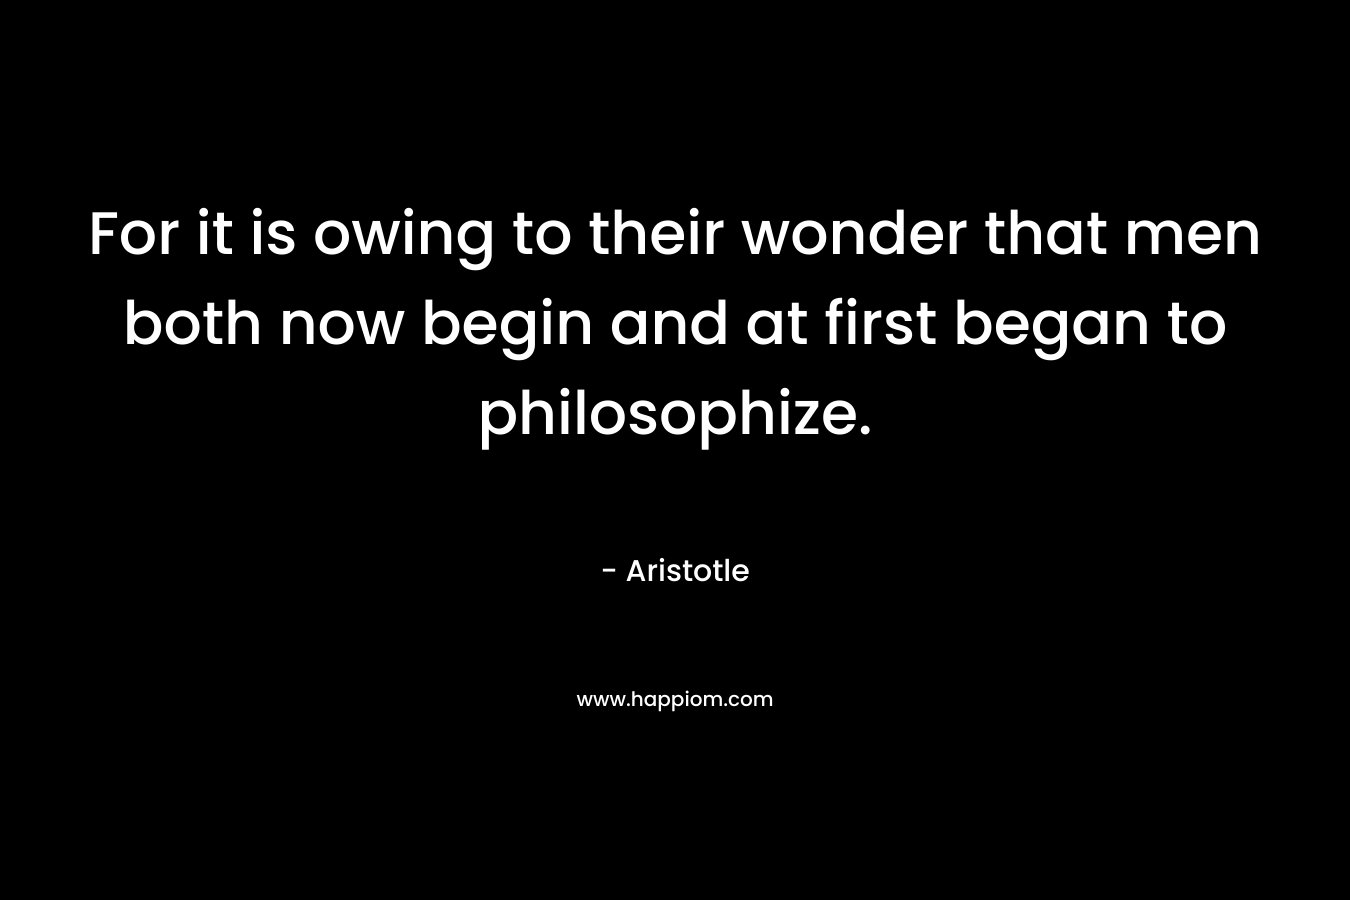 For it is owing to their wonder that men both now begin and at first began to philosophize. – Aristotle